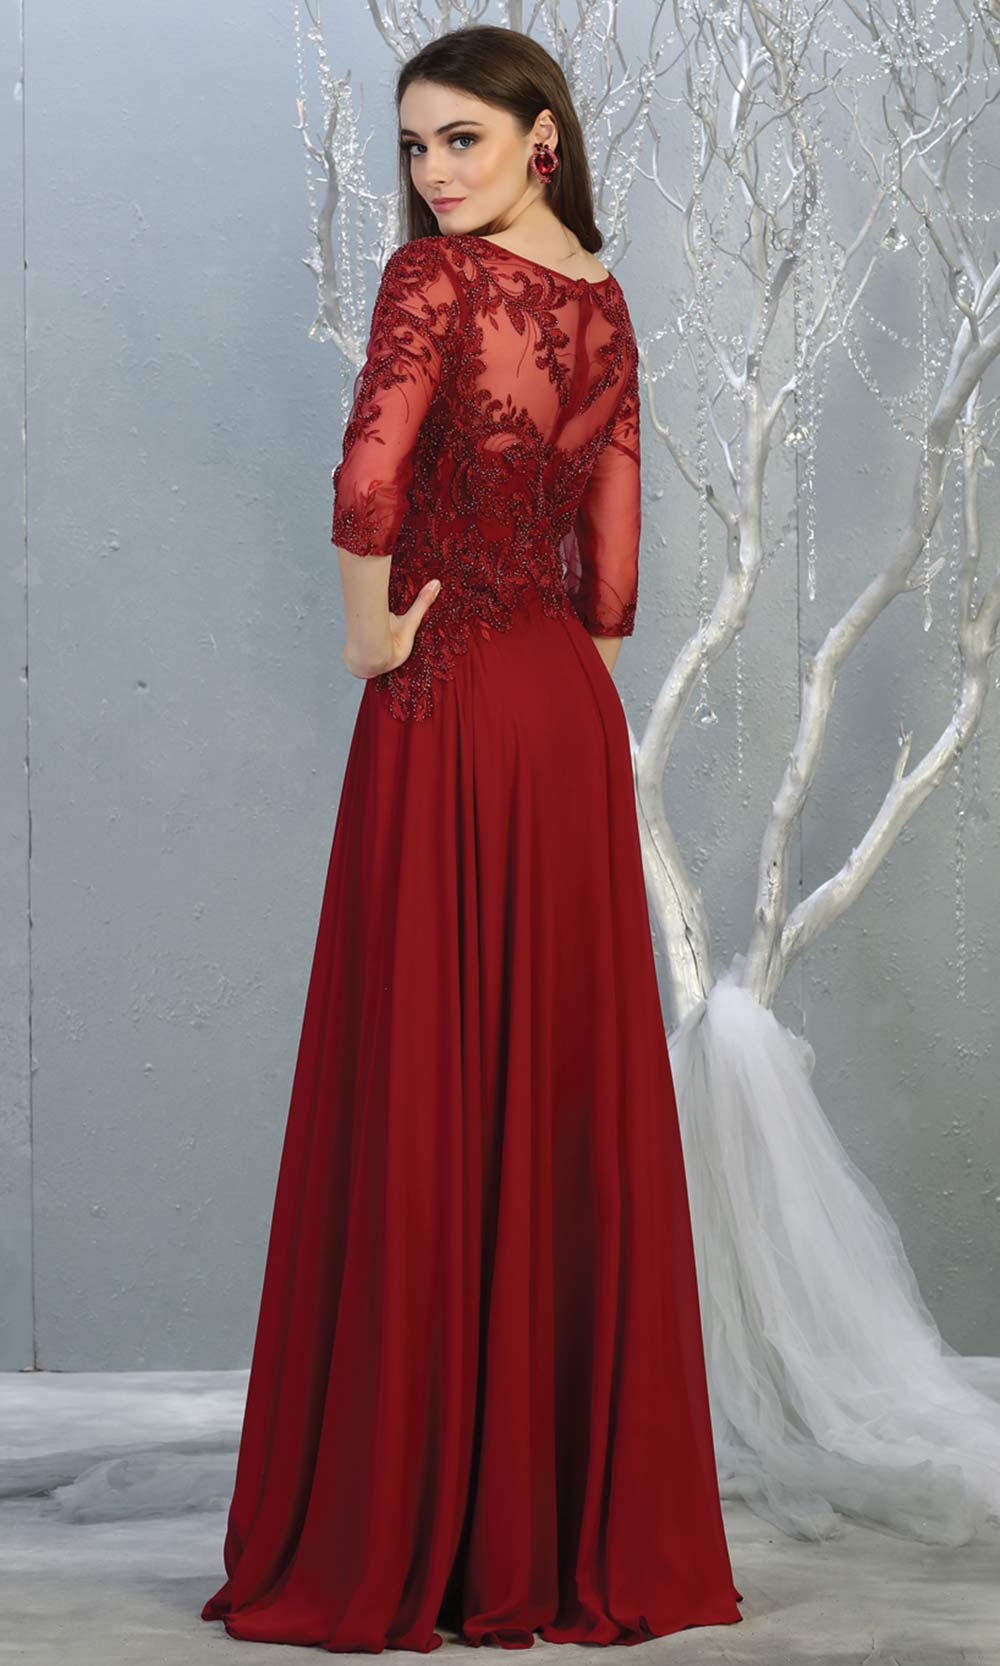 Mayqueen RQ7820 long burgundy red modest flowy dress w/ long sleeves. Dark red chiffon & lace top is perfect for  mother of the bride, formal wedding guest, indowestern gown, evening party dress, dark red muslim party dress. Plus sizes avail-b.jpg